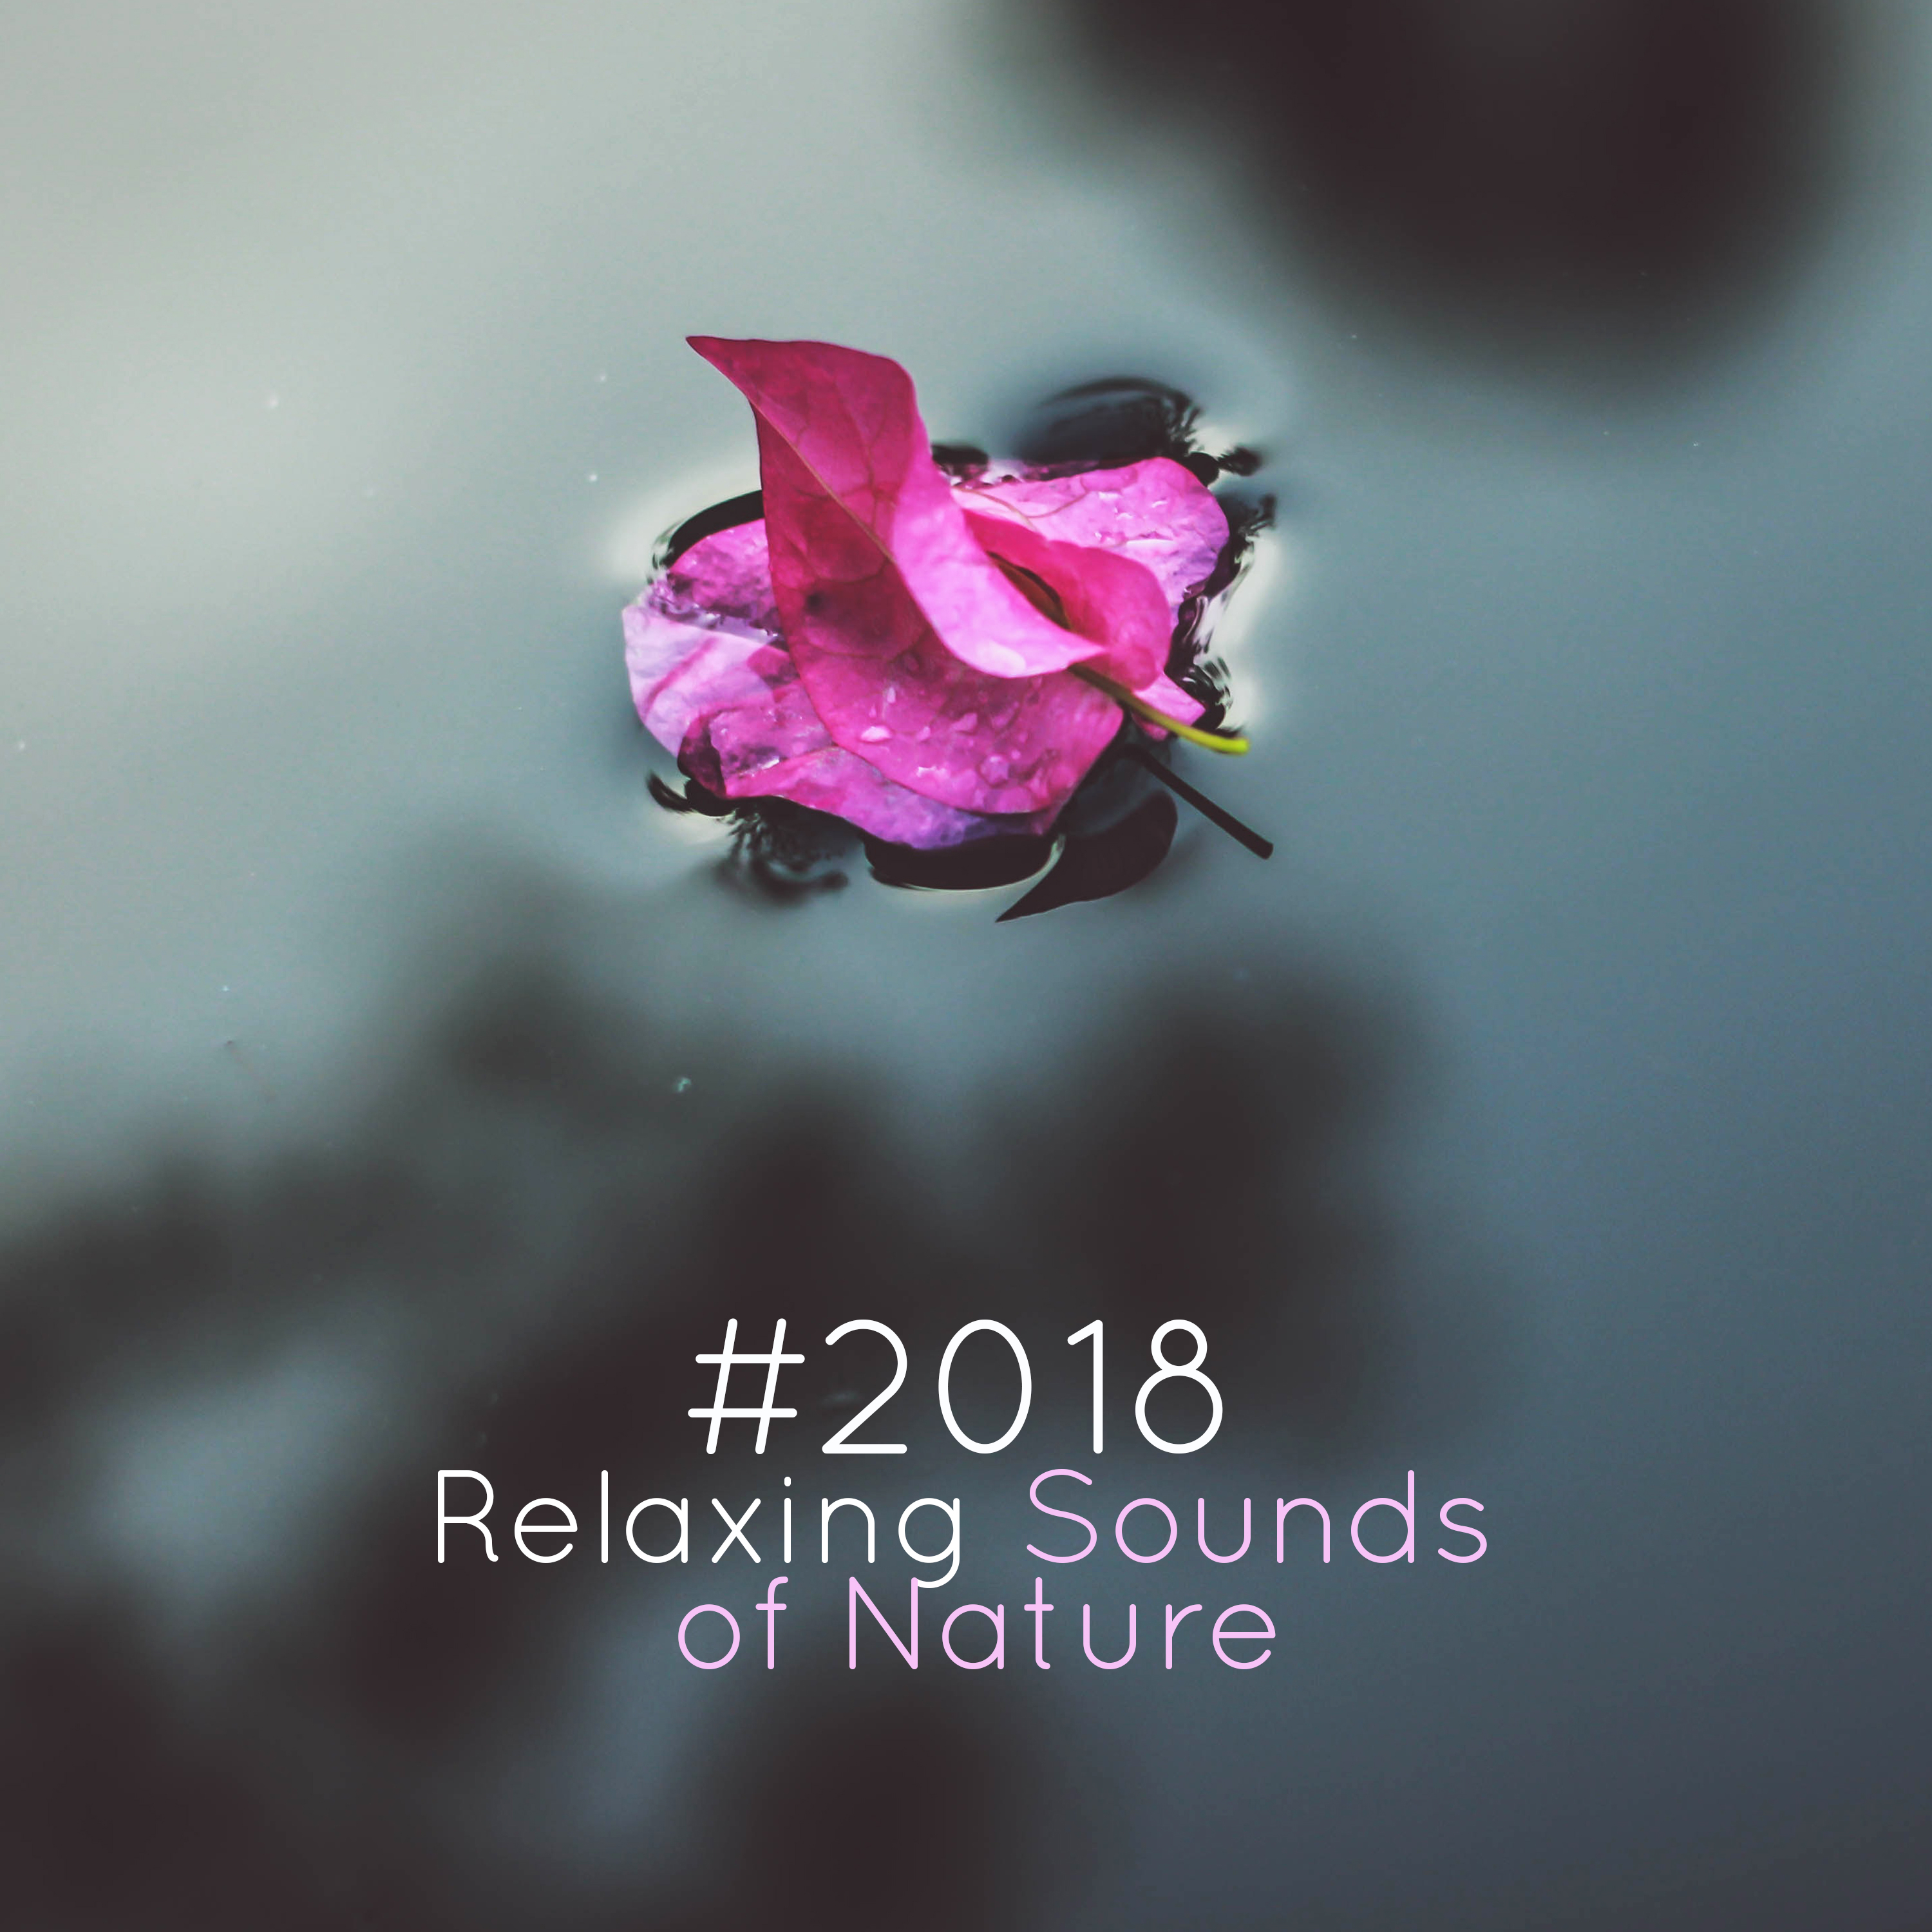 # 2018 Relaxing Sounds of Nature